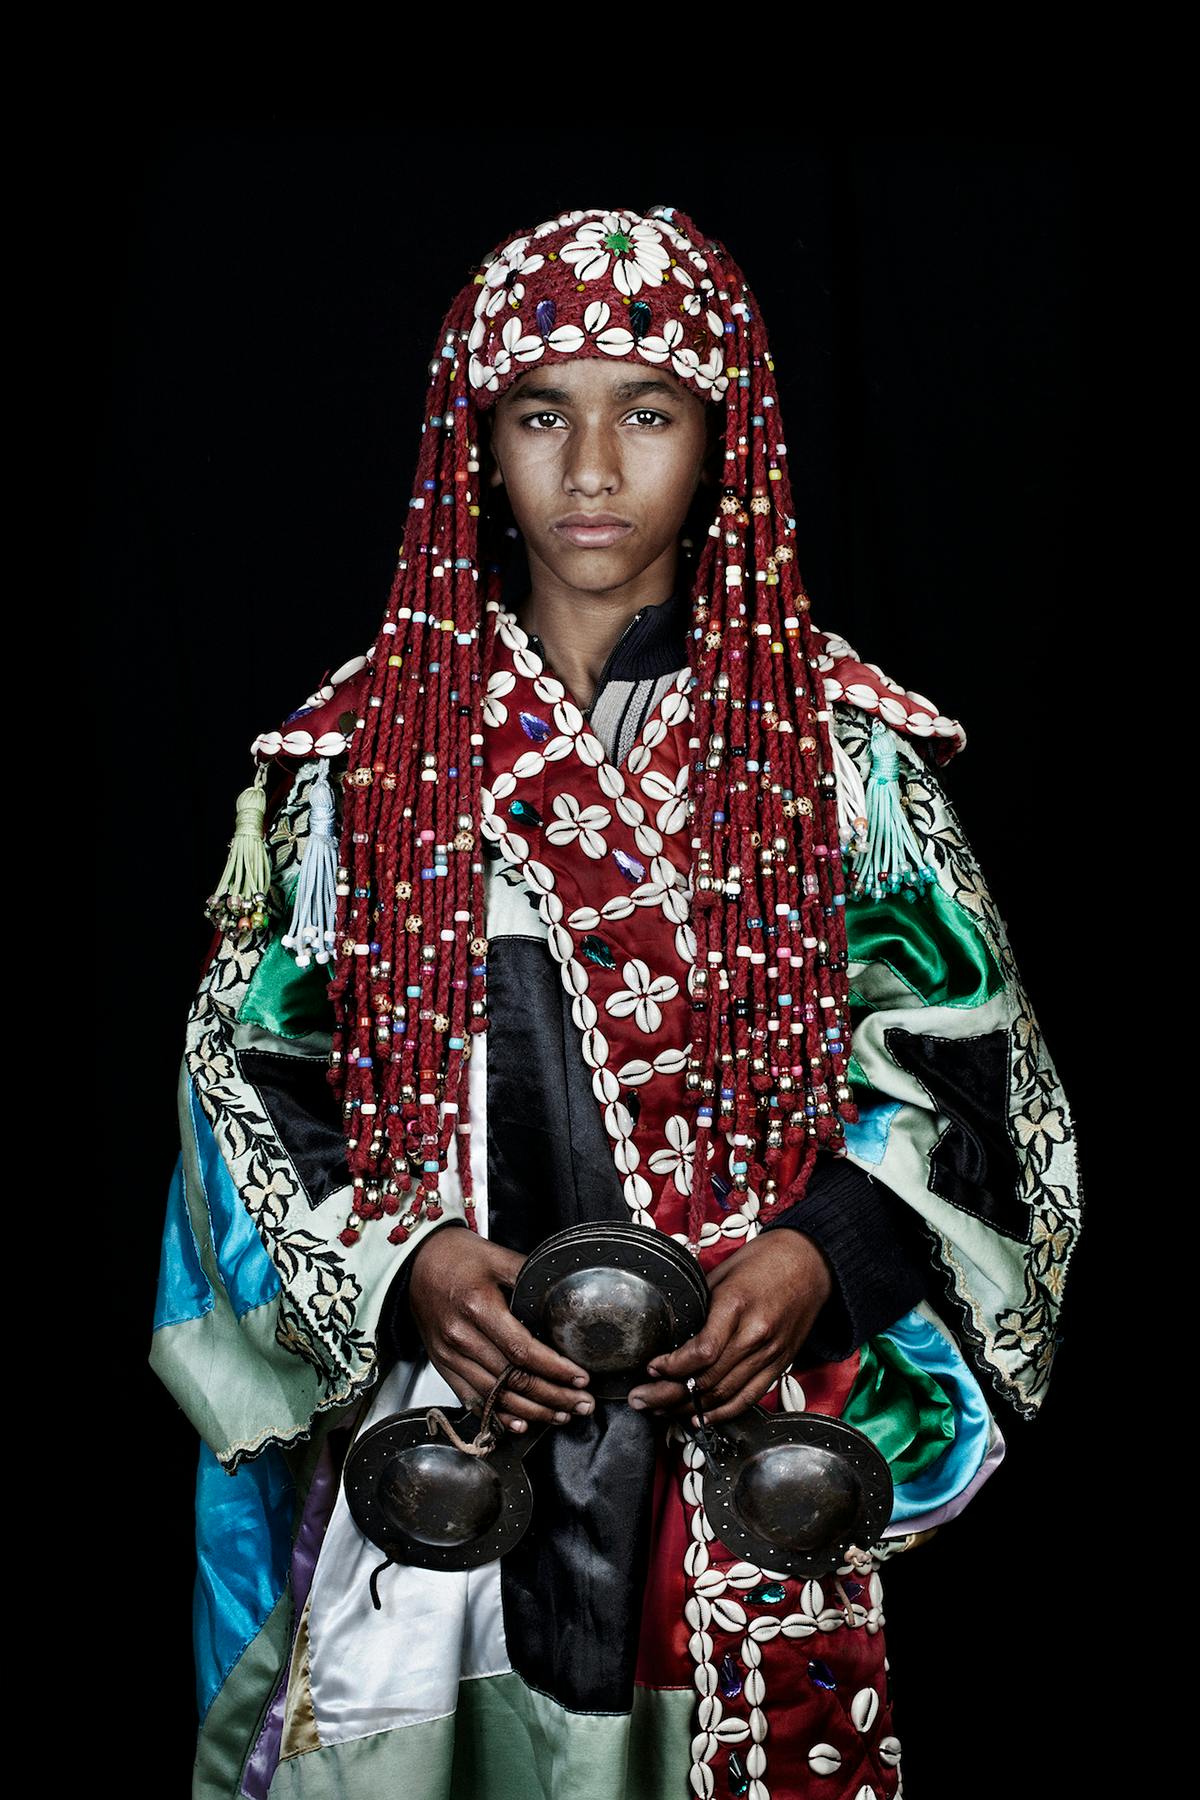 Tamesloht, 2011 from the series Les Marocains by Leila Alaoui